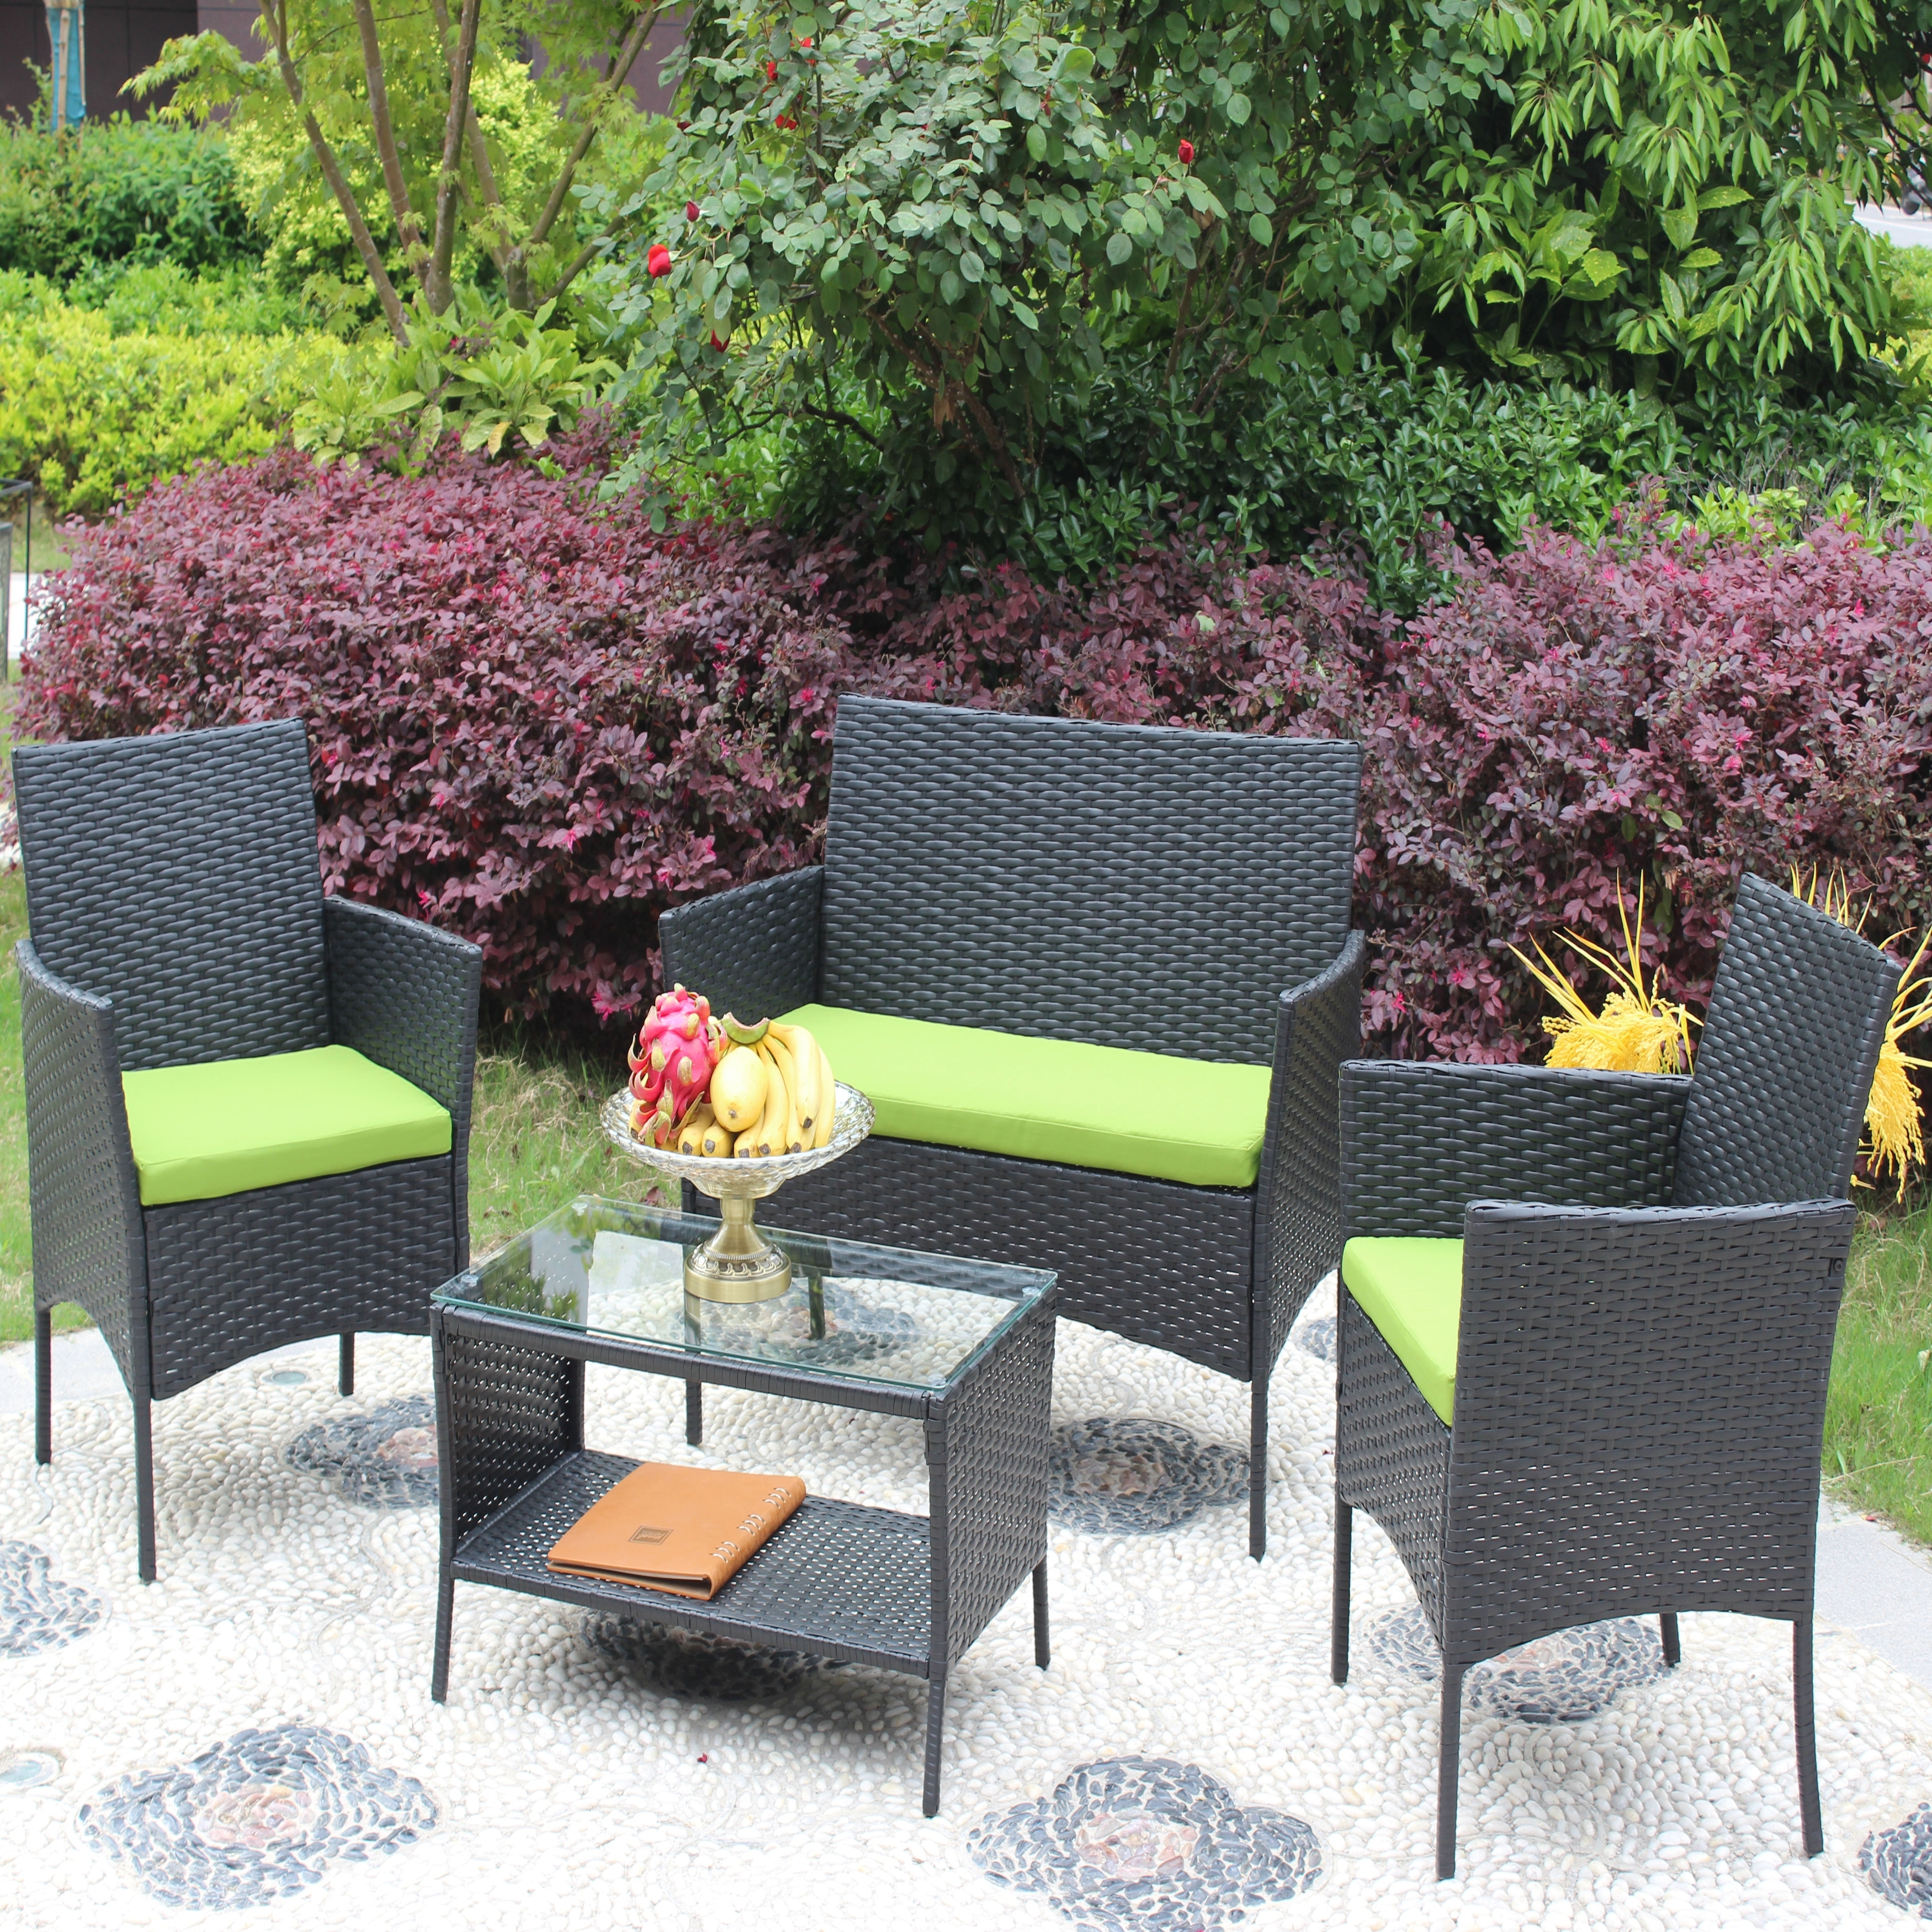 4-piece Rattan Patio Furniture Set With Cushioned Seats